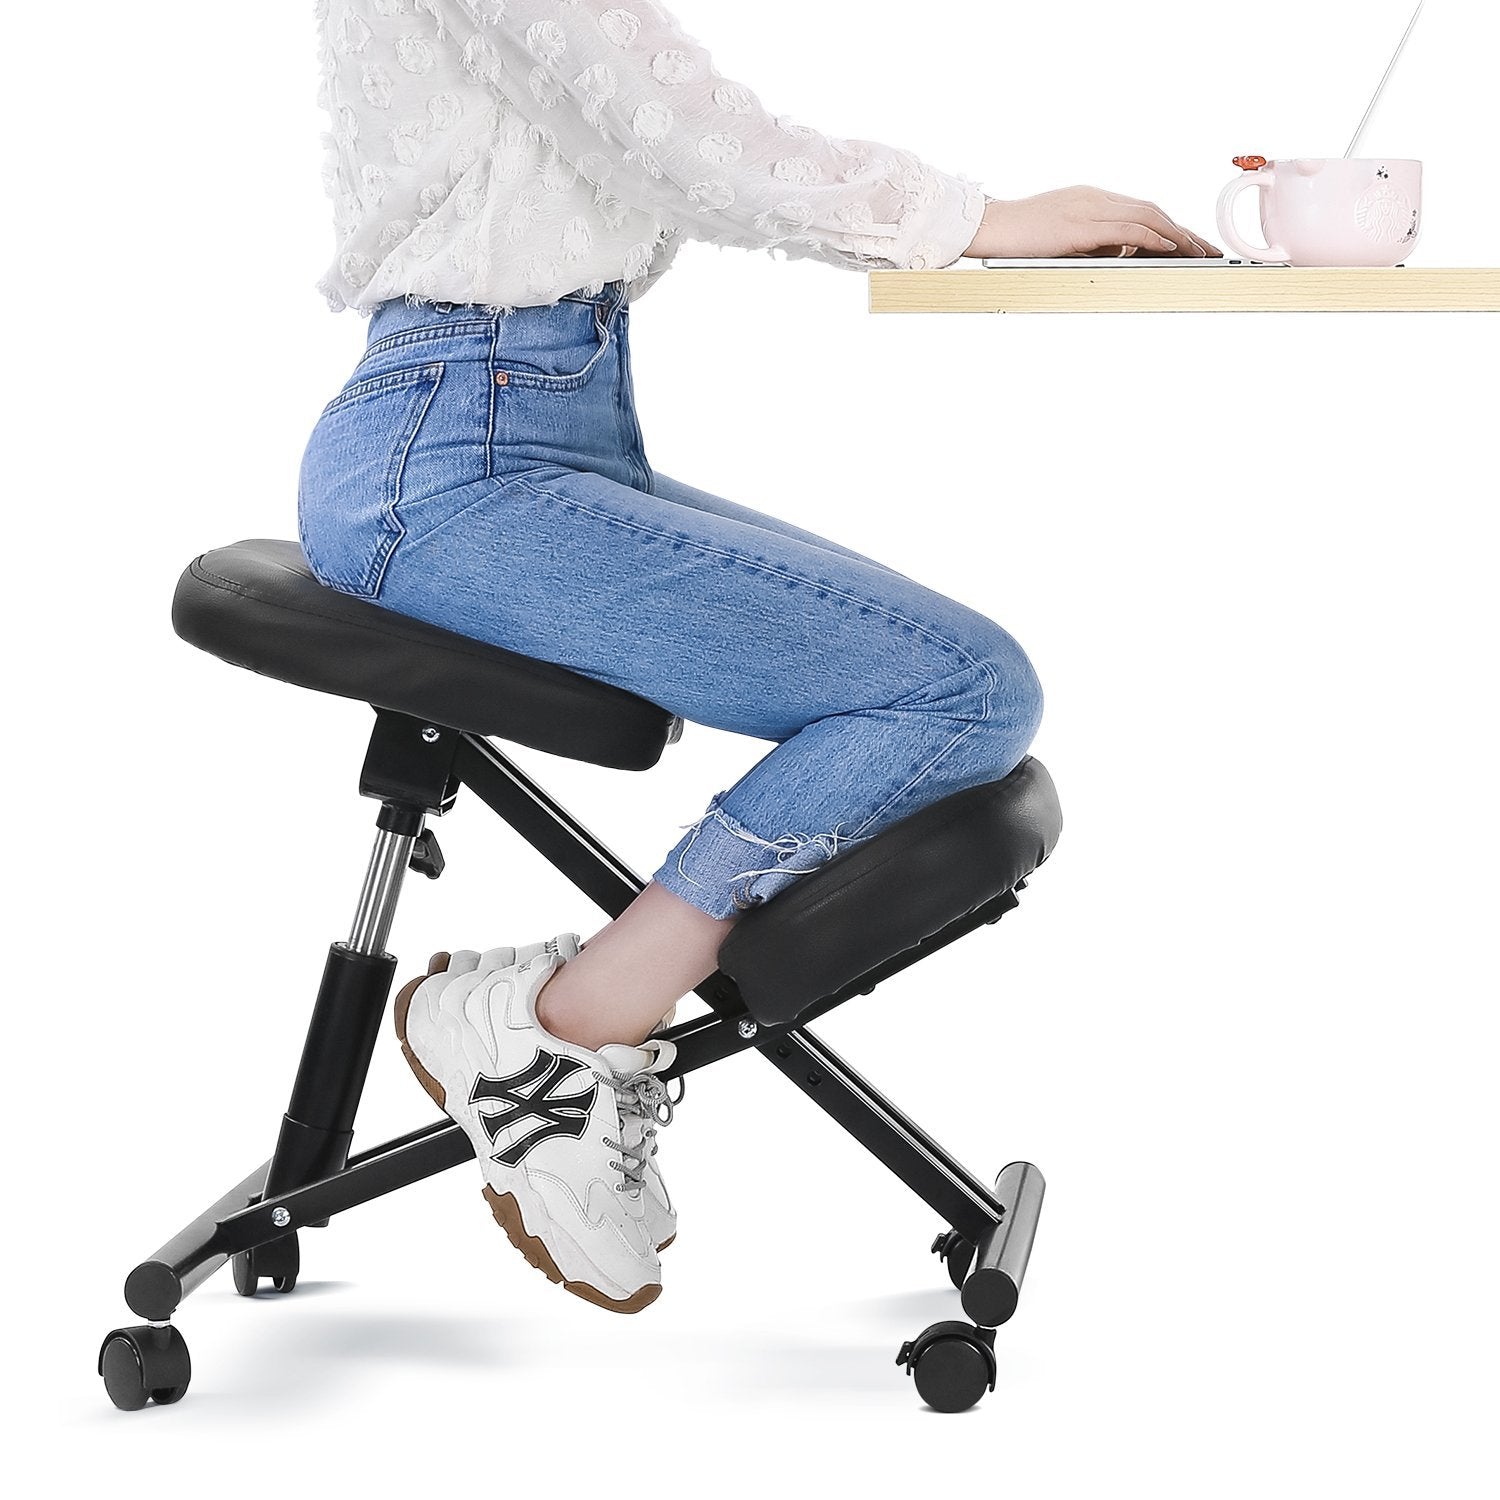 Load image into Gallery viewer, MaxKare Ergonomic Kneeling Chair Home Office Chairs with Height Adjustable for Corrective Posture Seat | Back Pain | Neck Pain Relieving | Spine Tension Relief-Thicken Kneeling Cushion - NAIPO
